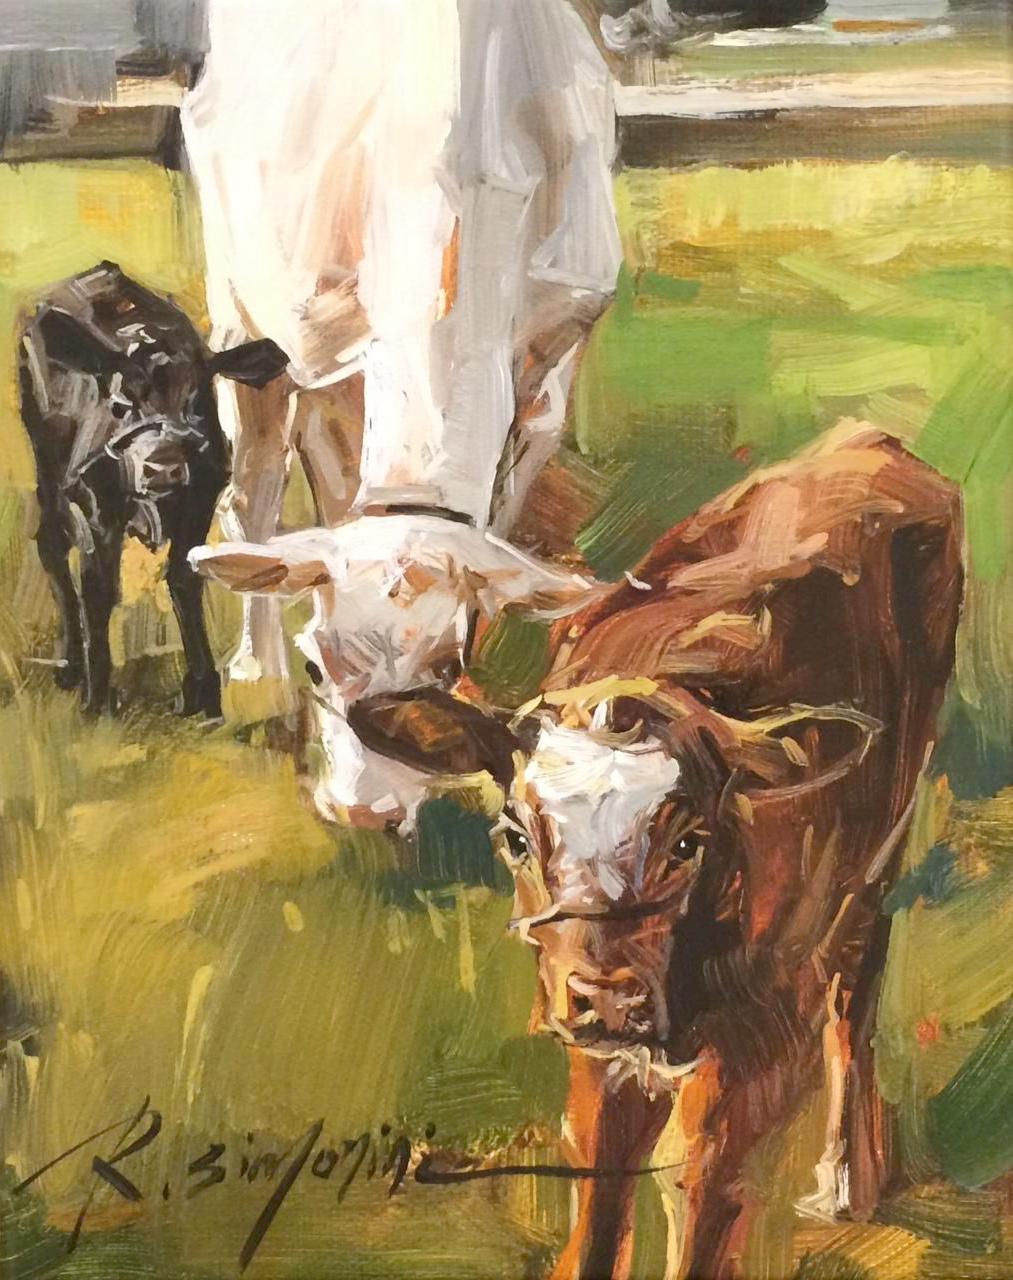 This painting by artist Ray Simonini titled "Looking at You" is a 10x8 farm animal oil painting on canvas featuring a three grazing cows in the pasture against lush colorful grass.  The cows are brown, white, and black.

About the artist:
Simonini